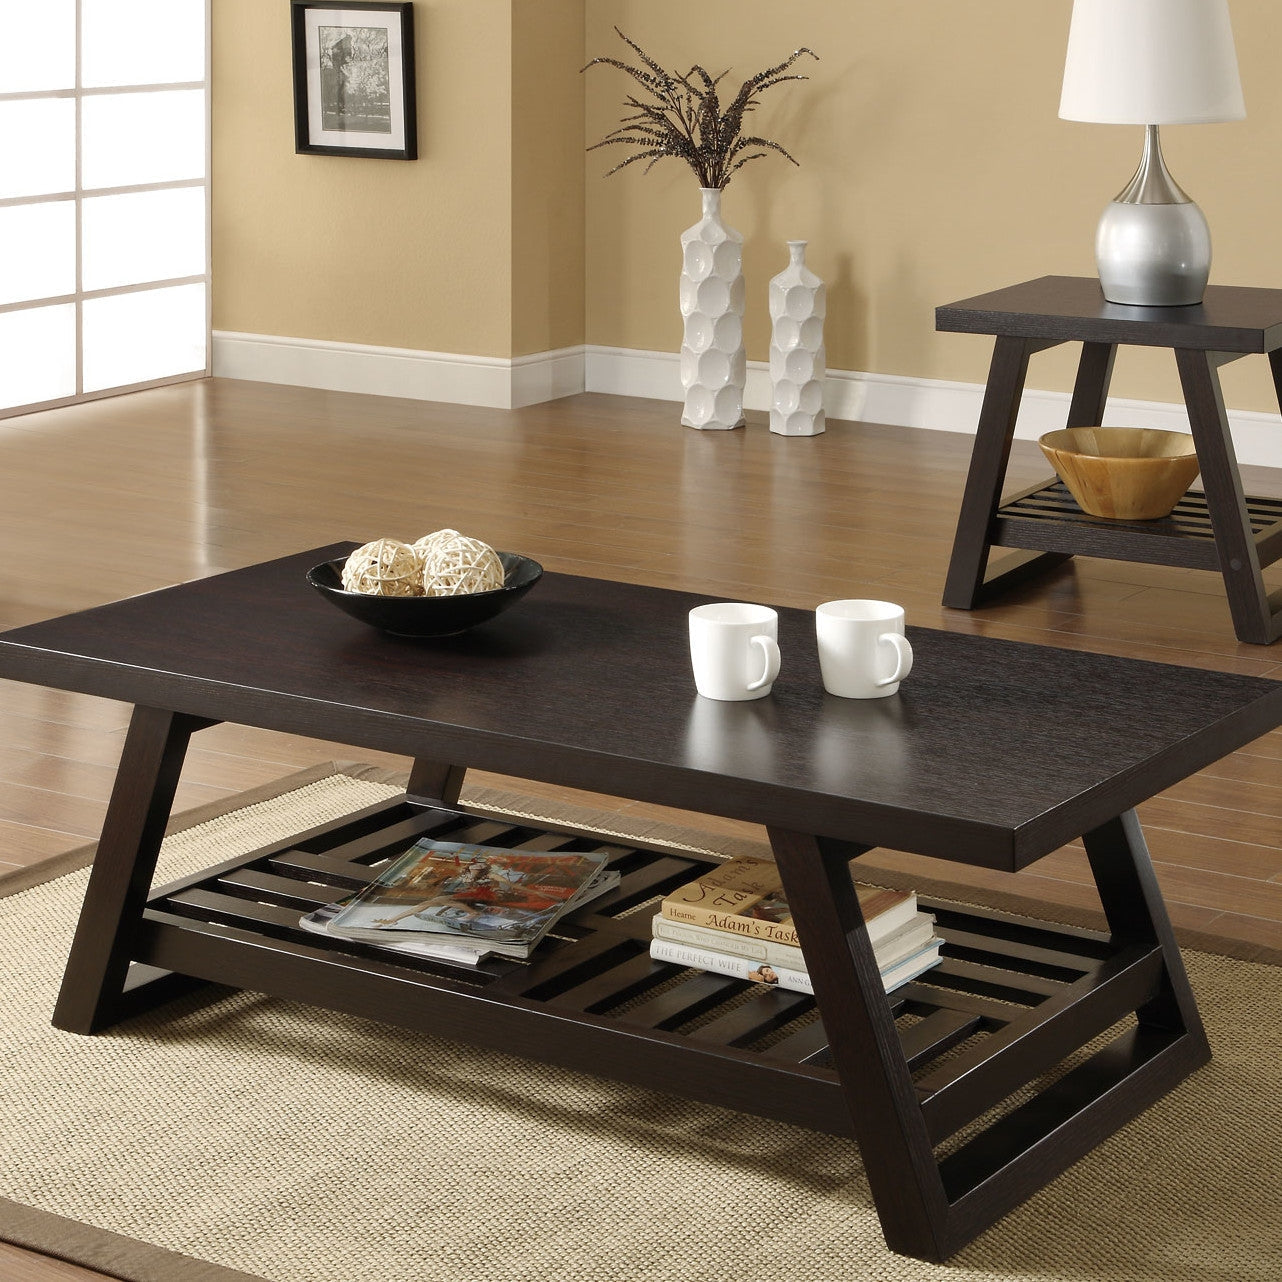 Living Room > Coffee Tables - Contemporary Coffee Table With Slatted Bottom Shelf In Rich Brown